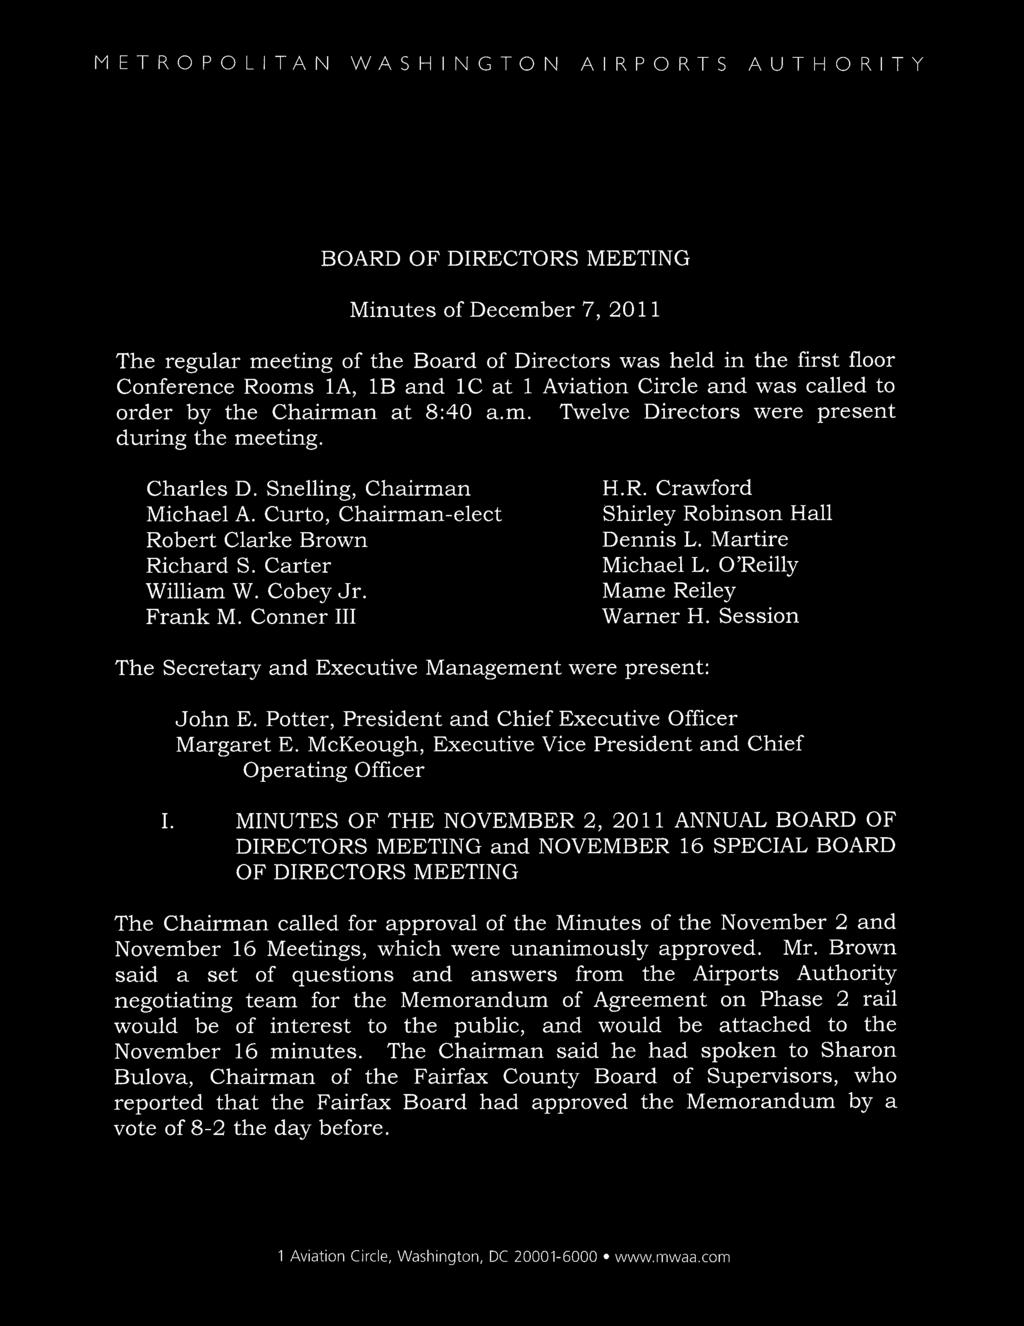 METROPOLITAN WASHINGTON AIRPORTS AUTHORITY + BOARD OF DIRECTORS MEETING Minutes of December 7,2011 The regular meeting of the Board of Directors was held in the first floor Conference Rooms la, 1B